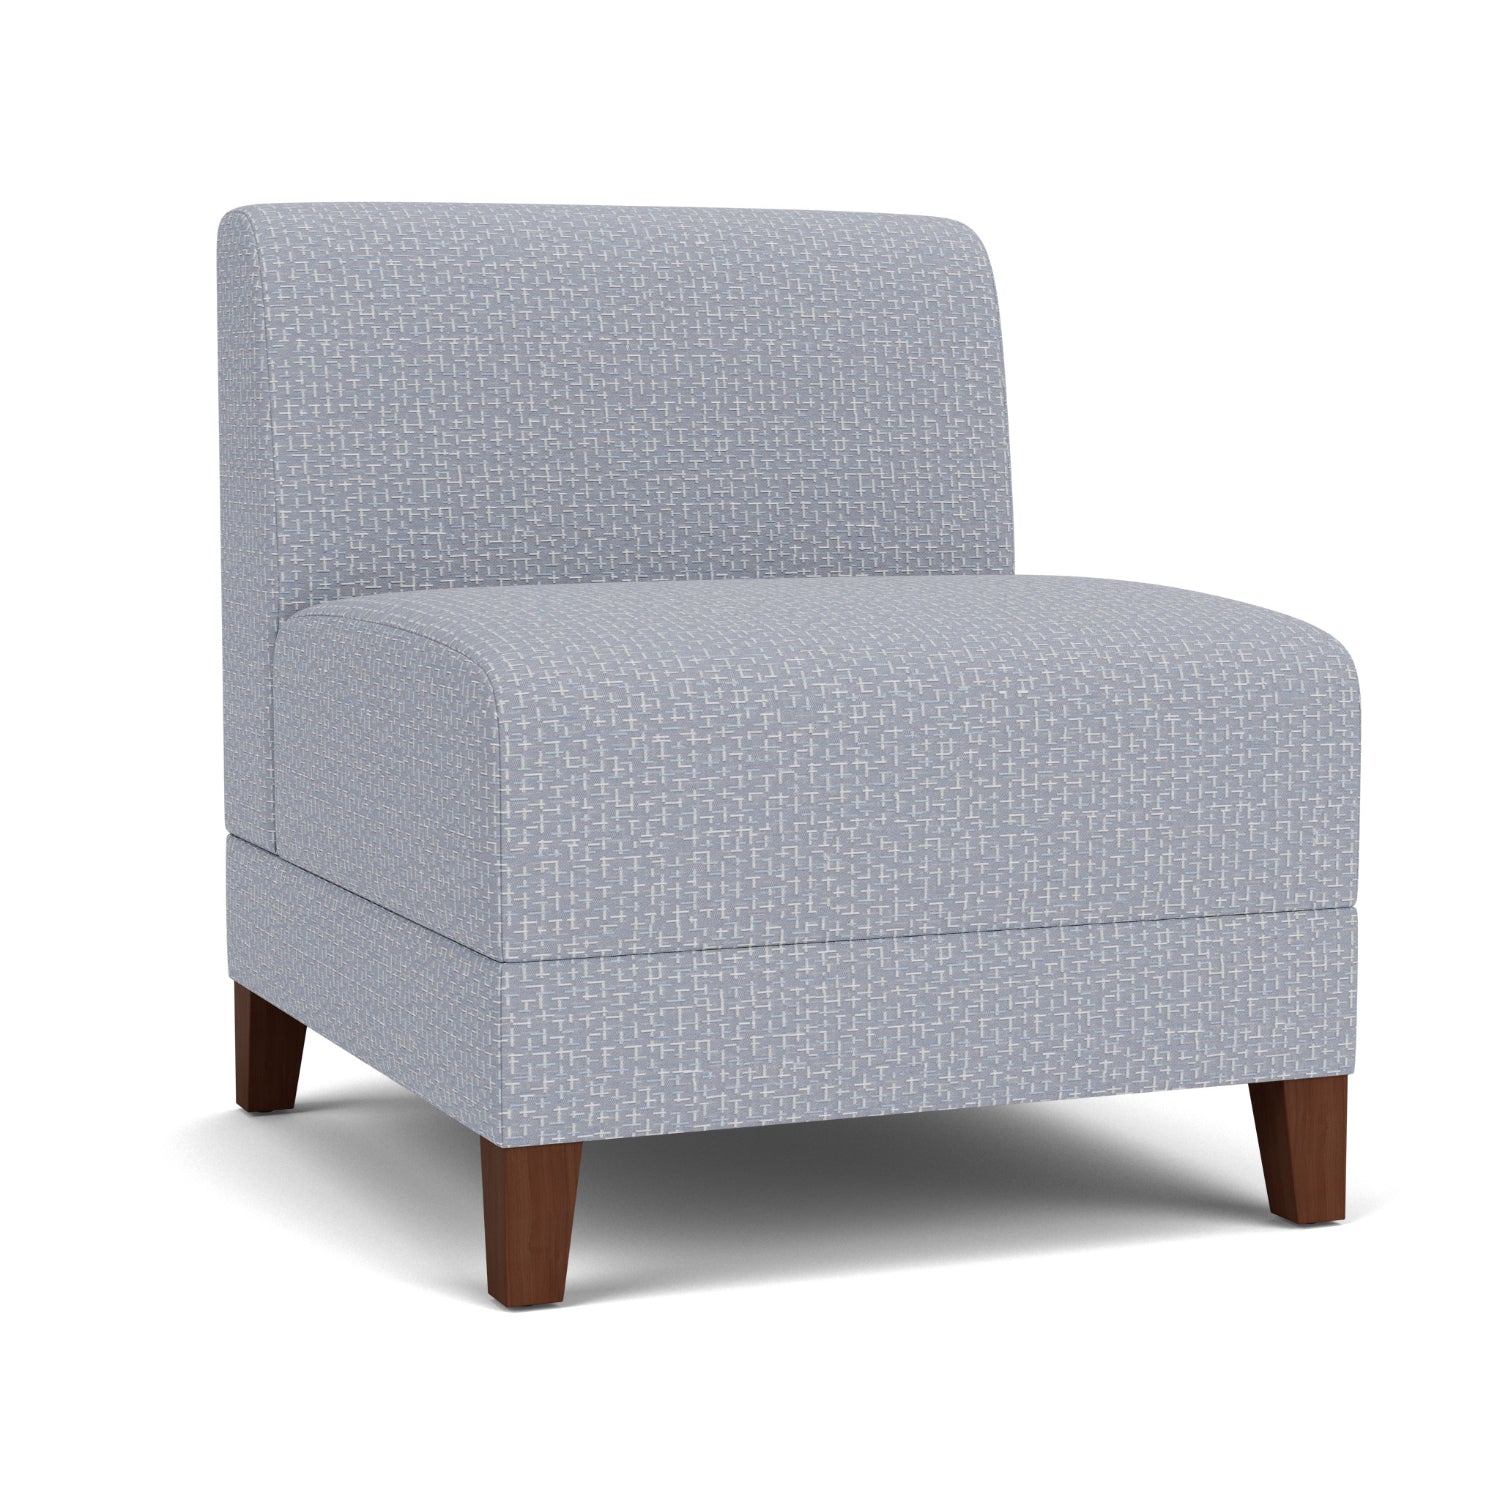 Fremont Collection Reception Seating, Armless Guest Chair, Designer Fabric Upholstery, FREE SHIPPING